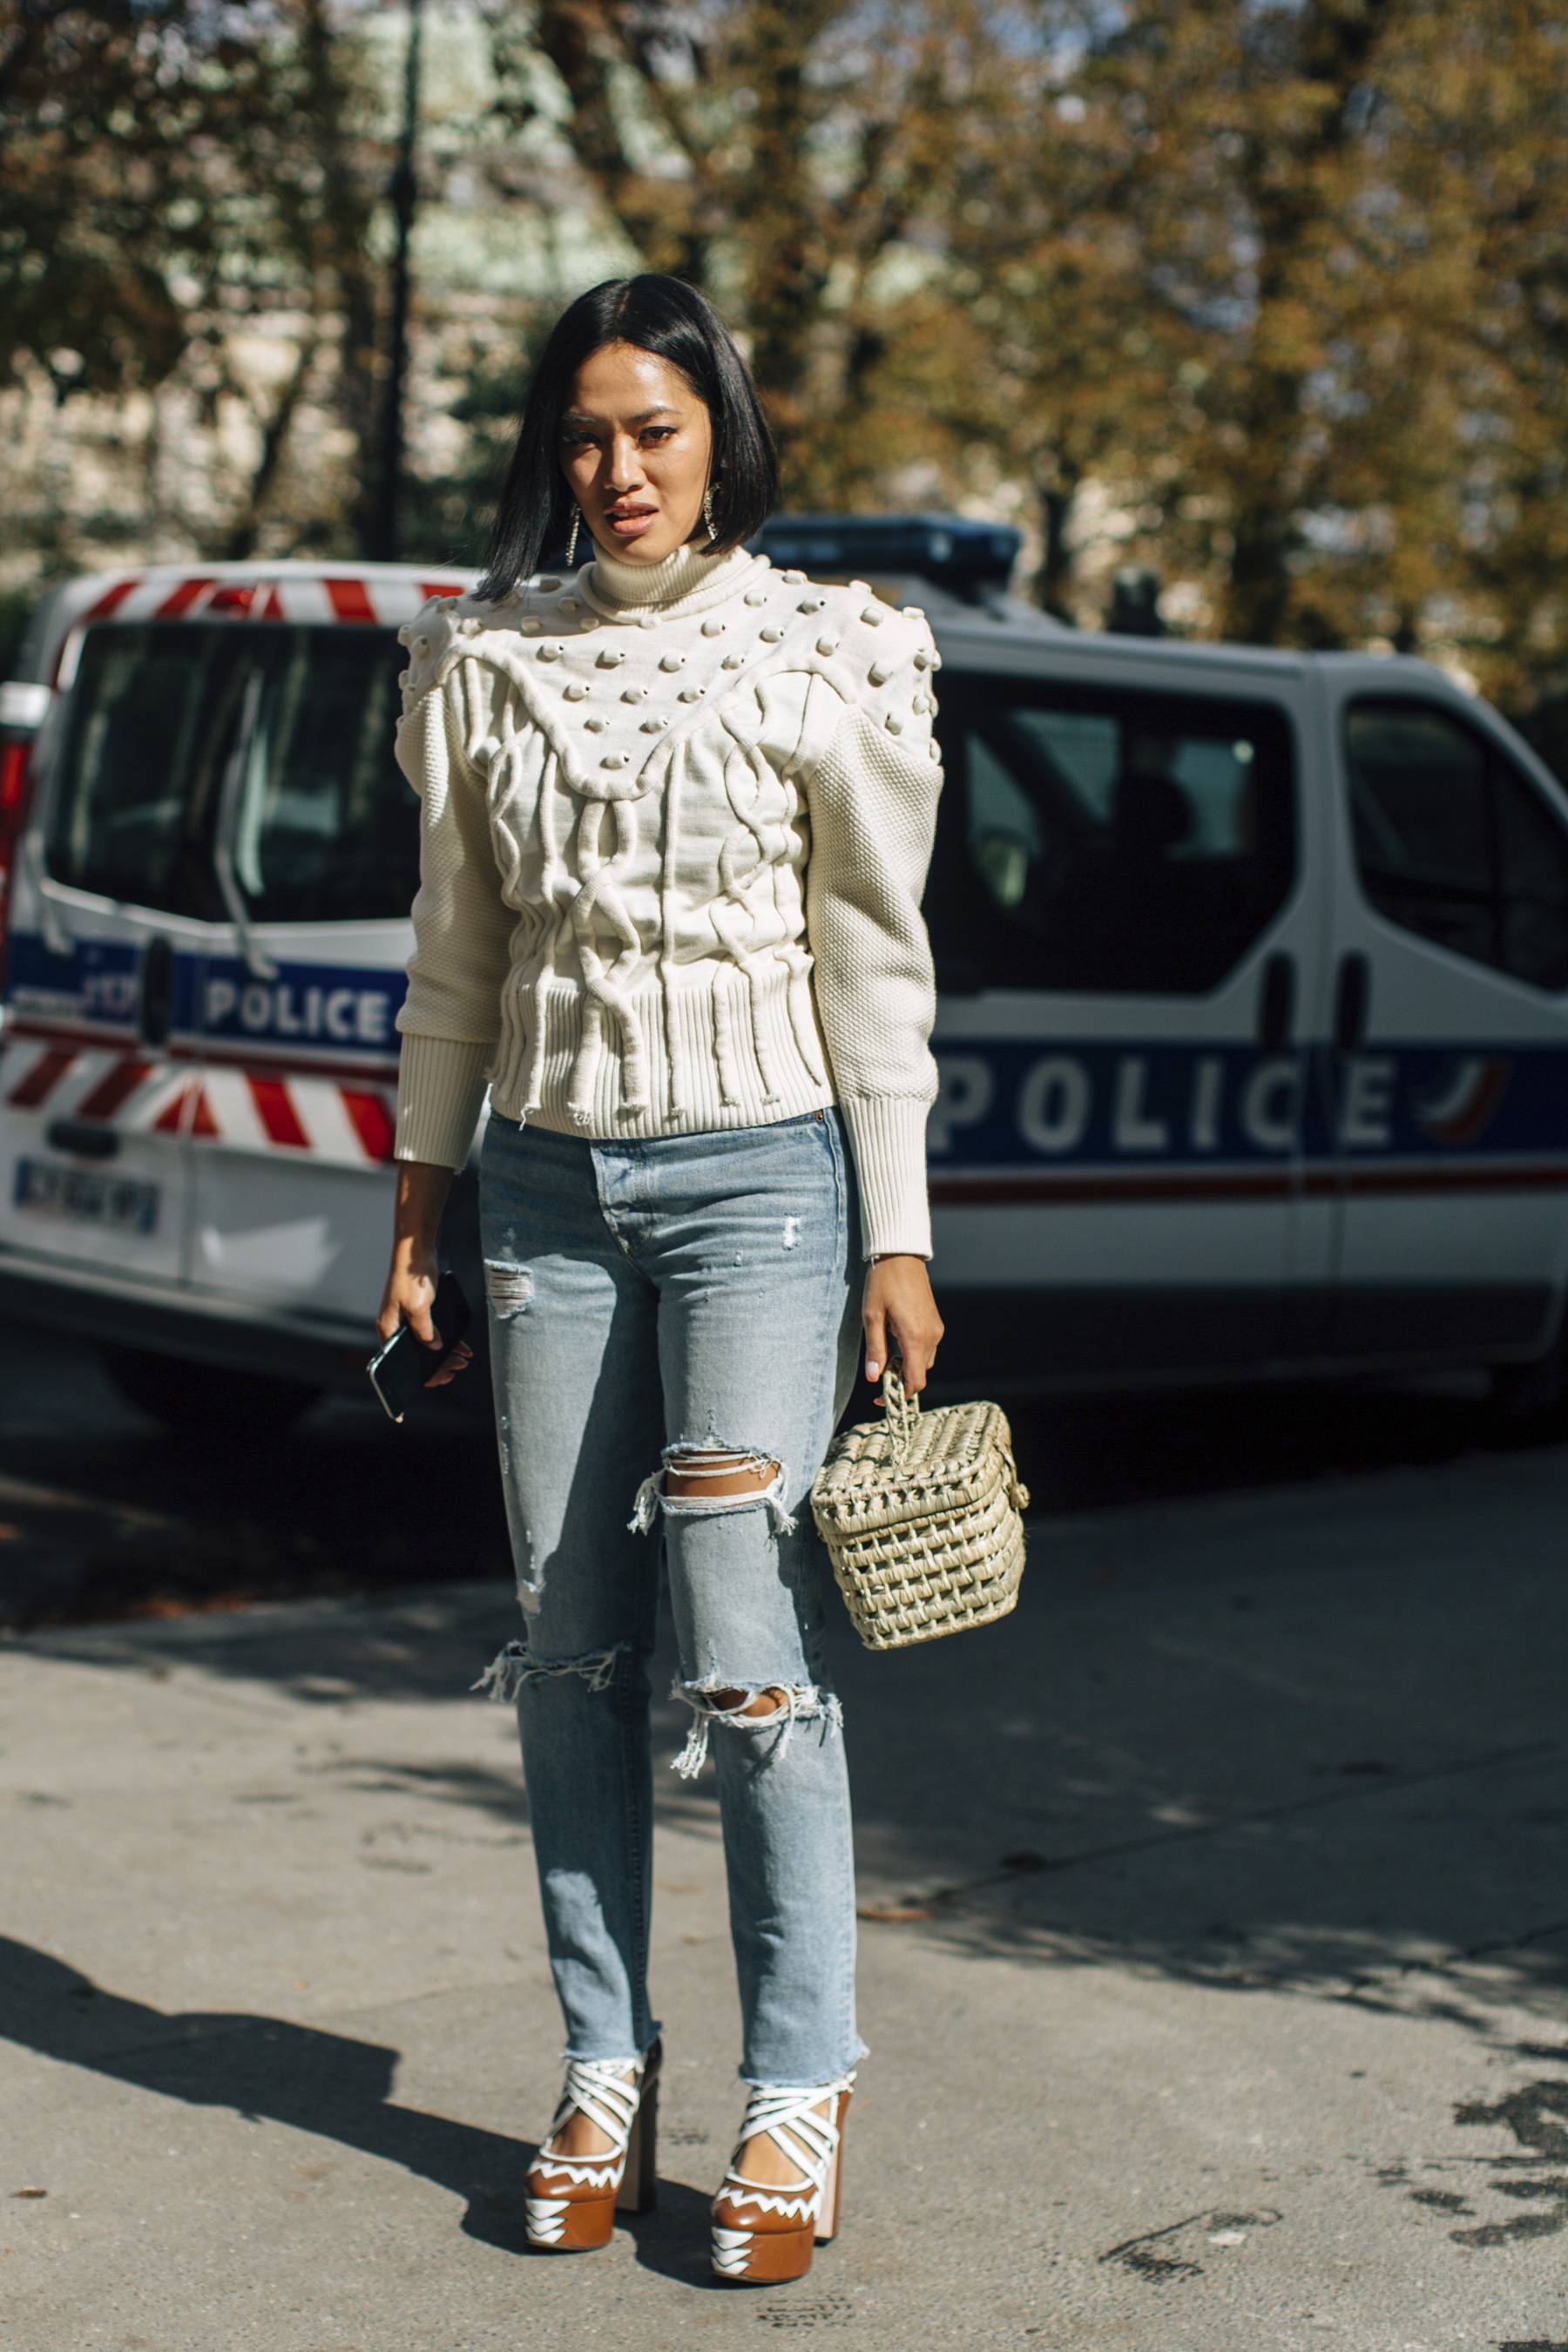 The Impression's Top 15 Influential Street Style Mavens